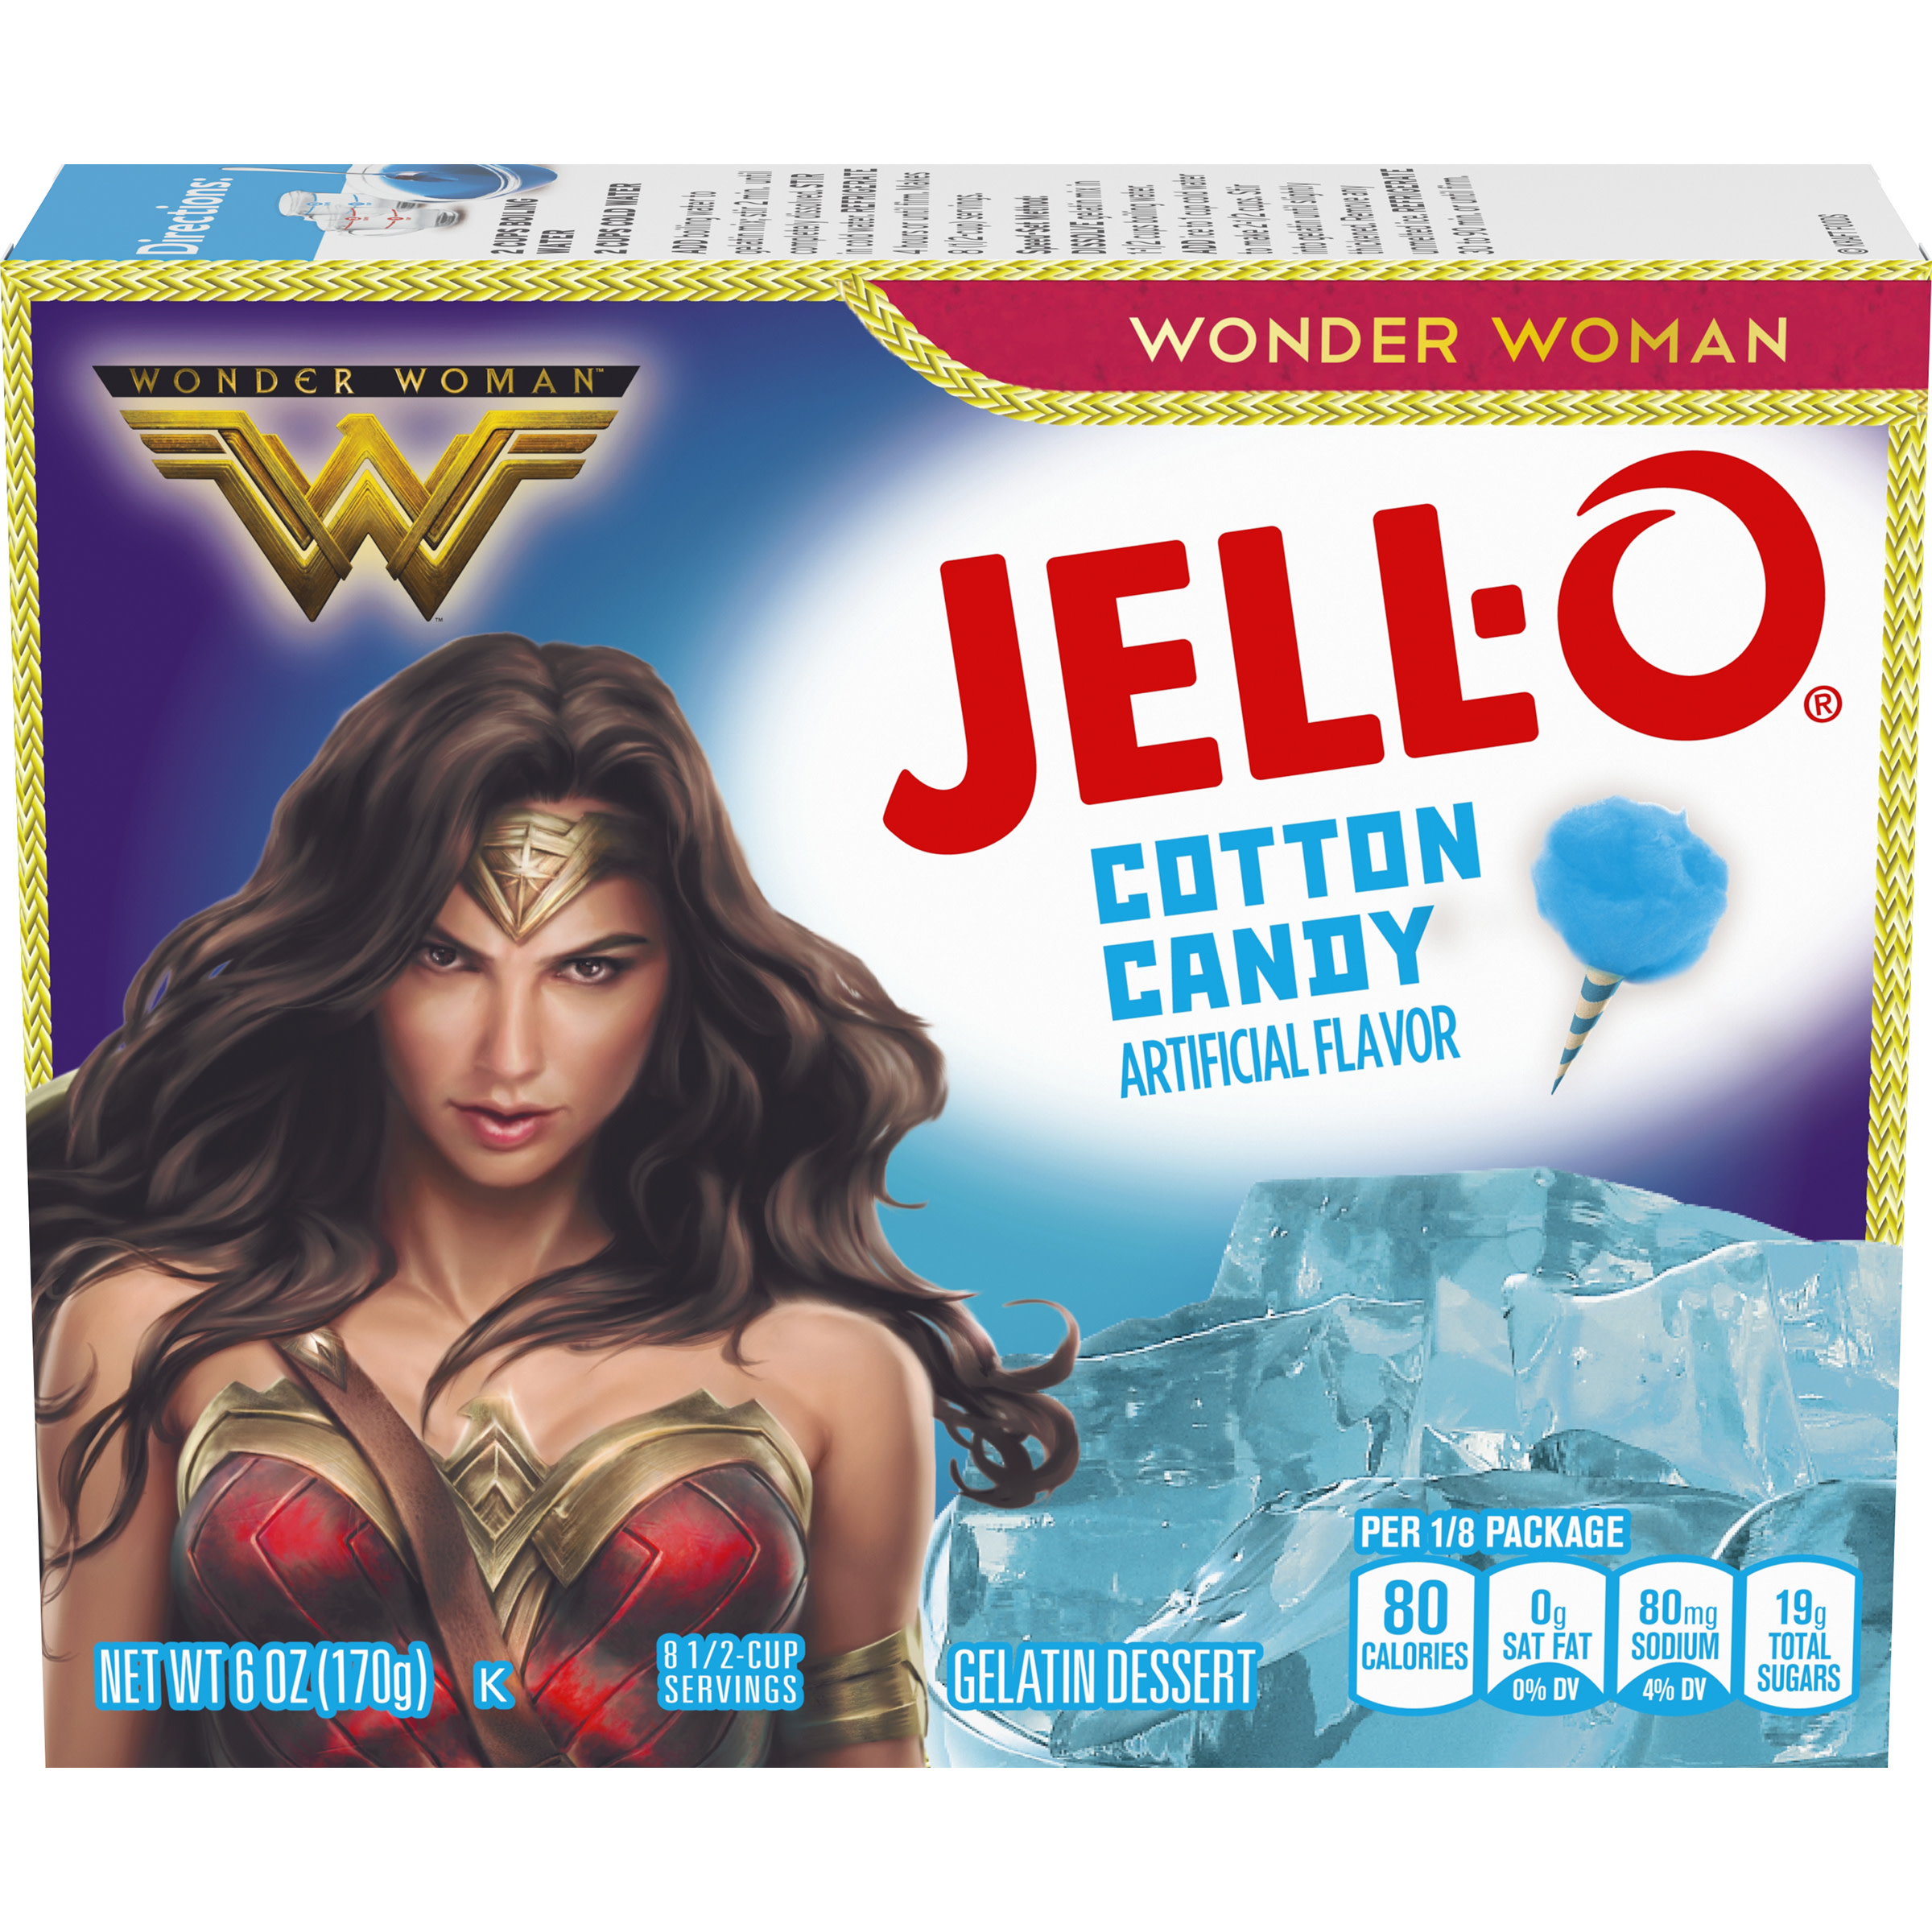 Jell-O Cotton Candy Instant Gelatin Mix, 6 oz Box - image 1 of 8